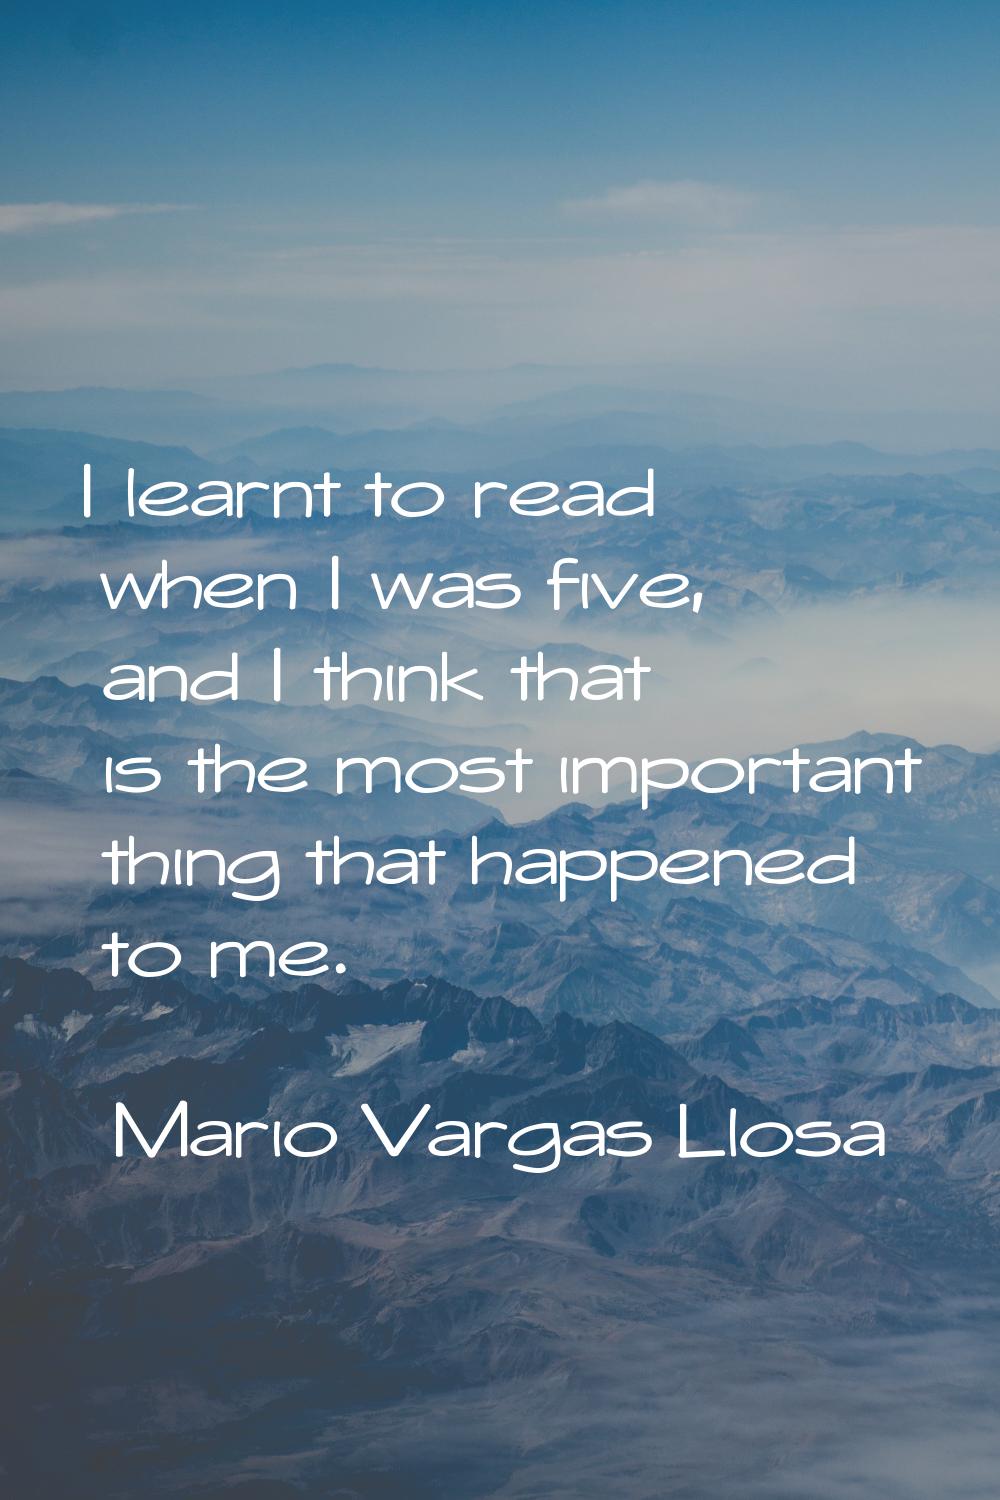 I learnt to read when I was five, and I think that is the most important thing that happened to me.